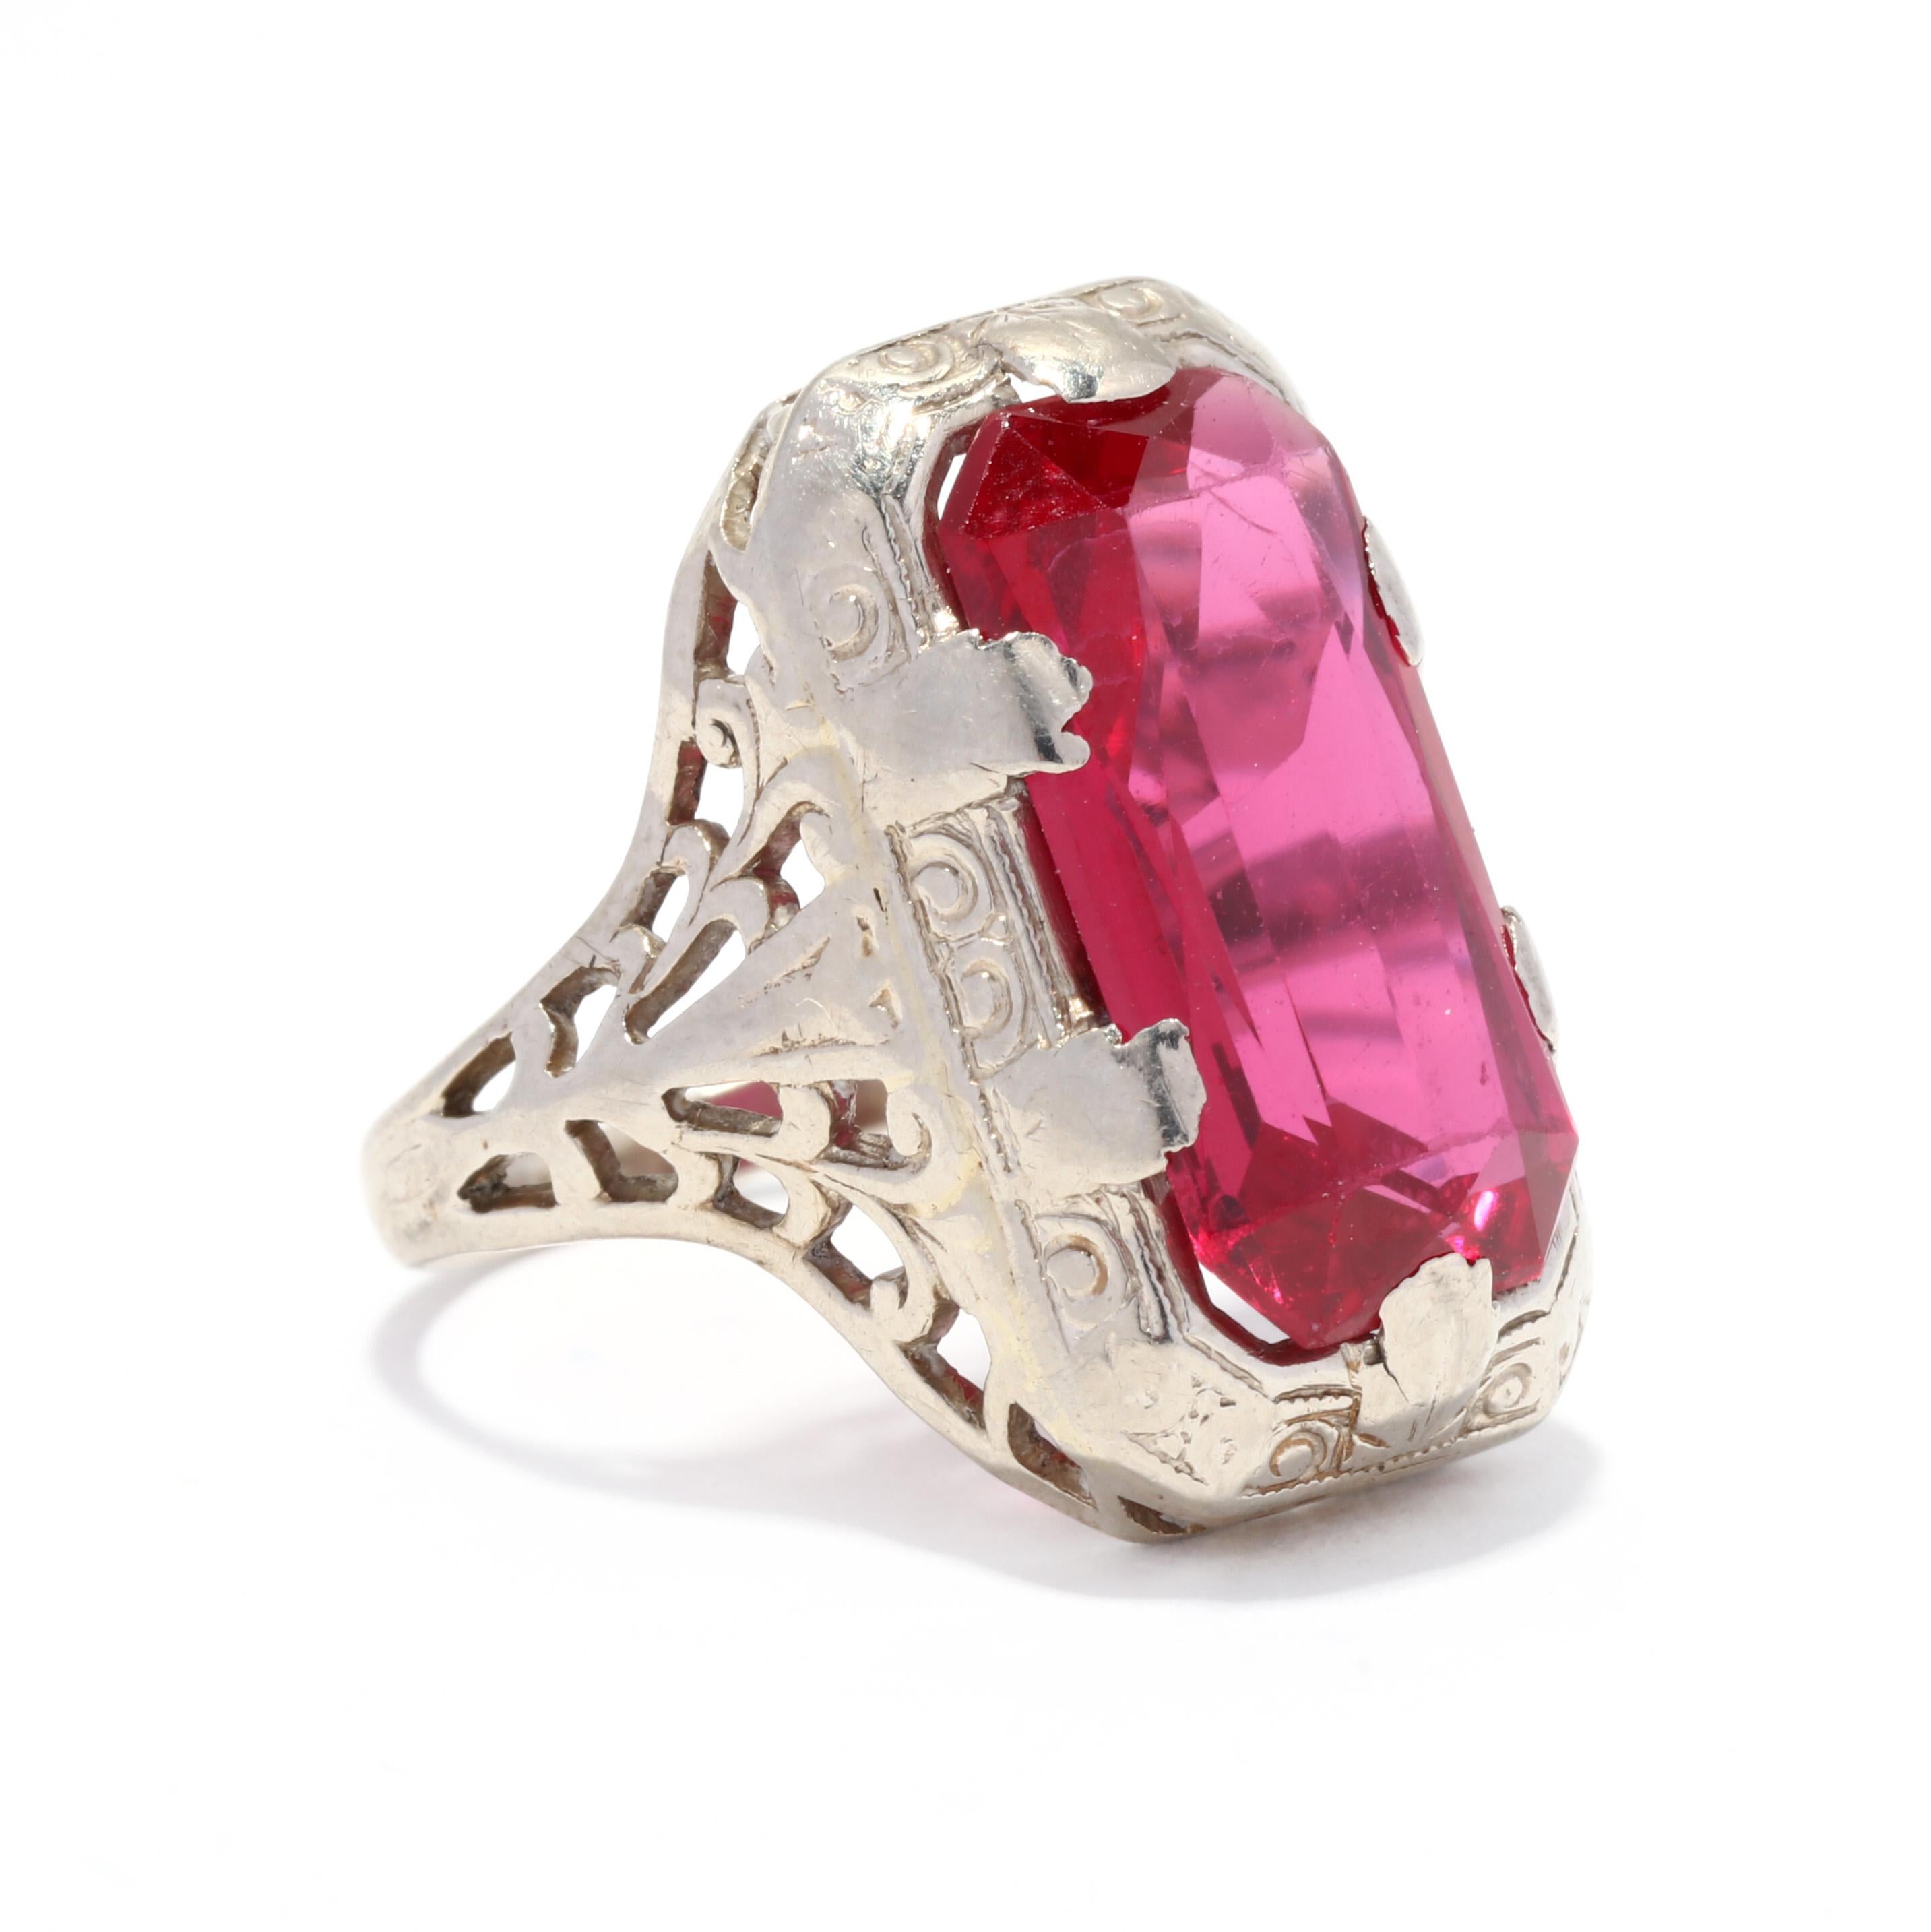 An Art Deco 14 karat white gold created ruby filigree ring. This ring features a prong set, rectangle emerald cut created ruby weighing approximately ? carats, set in a floral engraved and filigree mounting.

Stones:
- created ruby, 1 stone
-